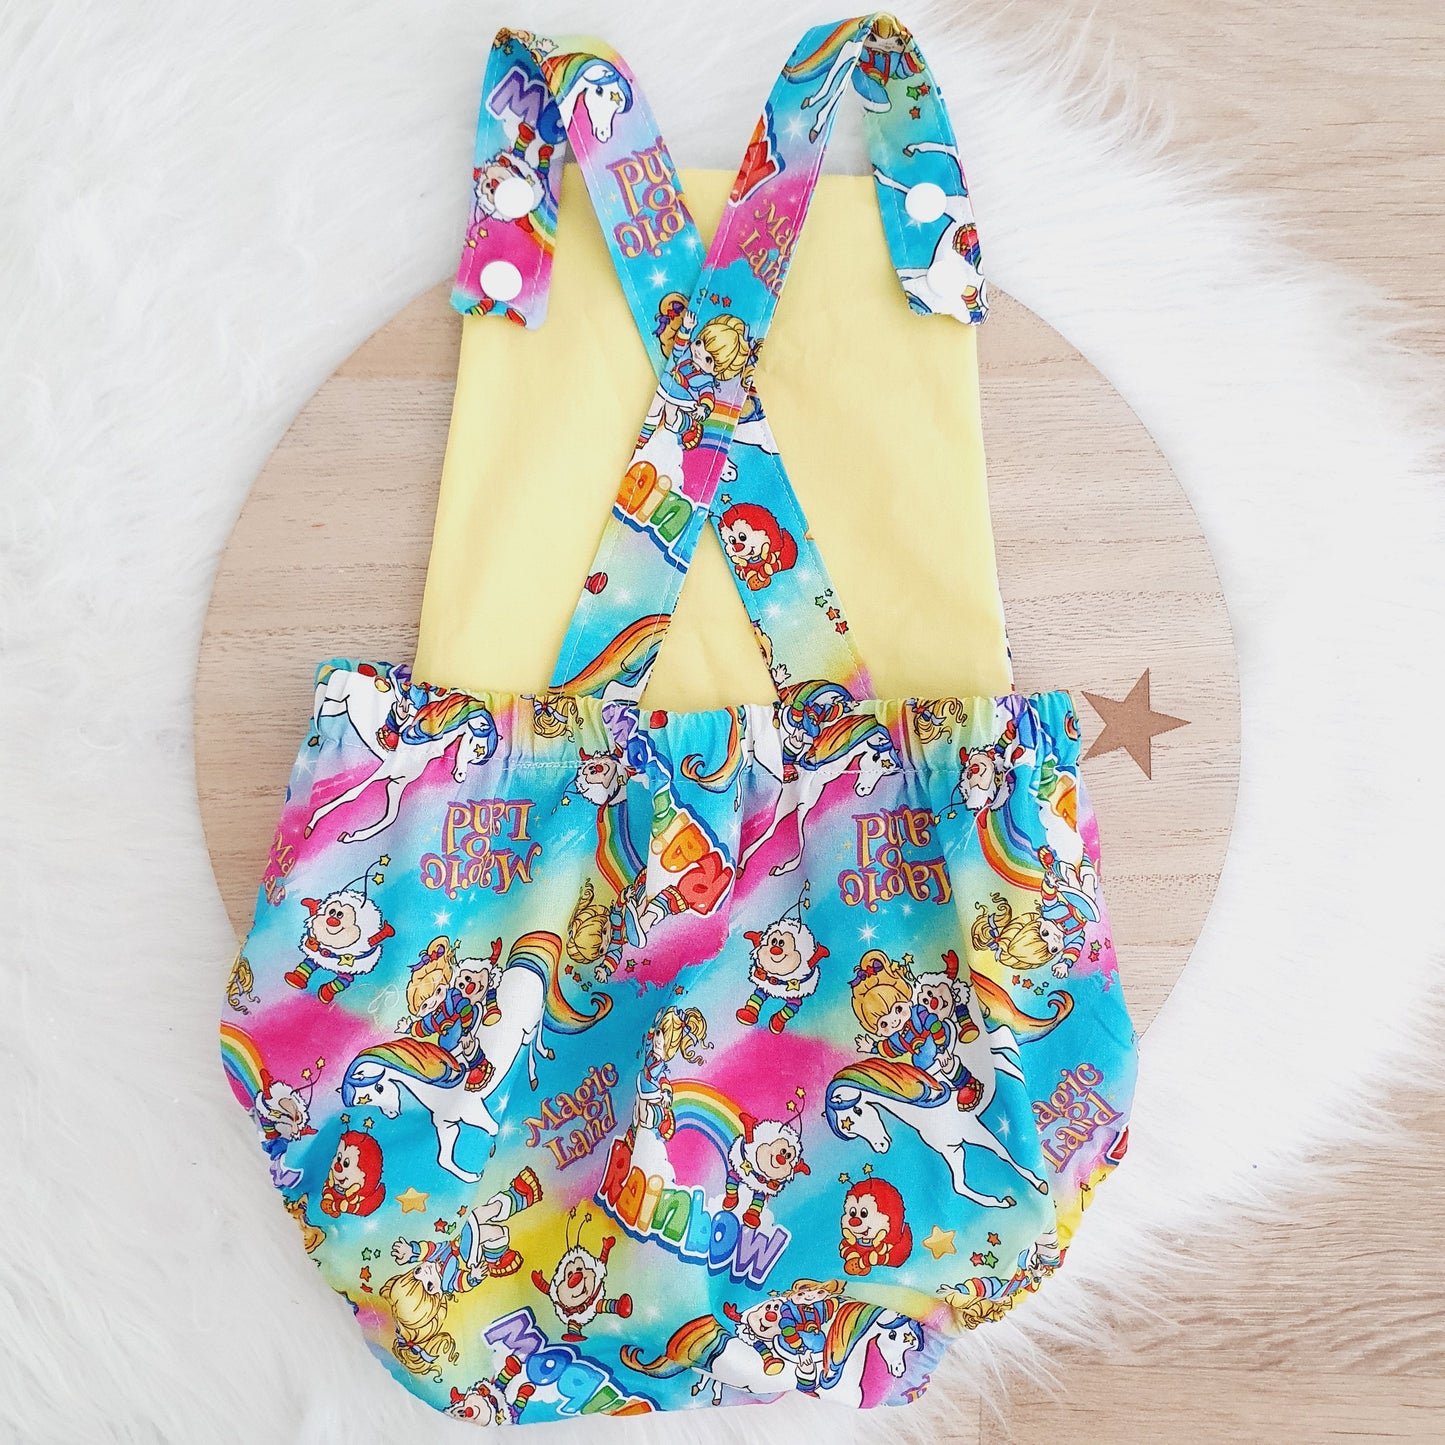 RAINBOW BRITE print Baby Romper, Handmade Baby Clothing, Size 1 - 1st Birthday Clothing / Cake Smash Outfit, 12 - 18 months